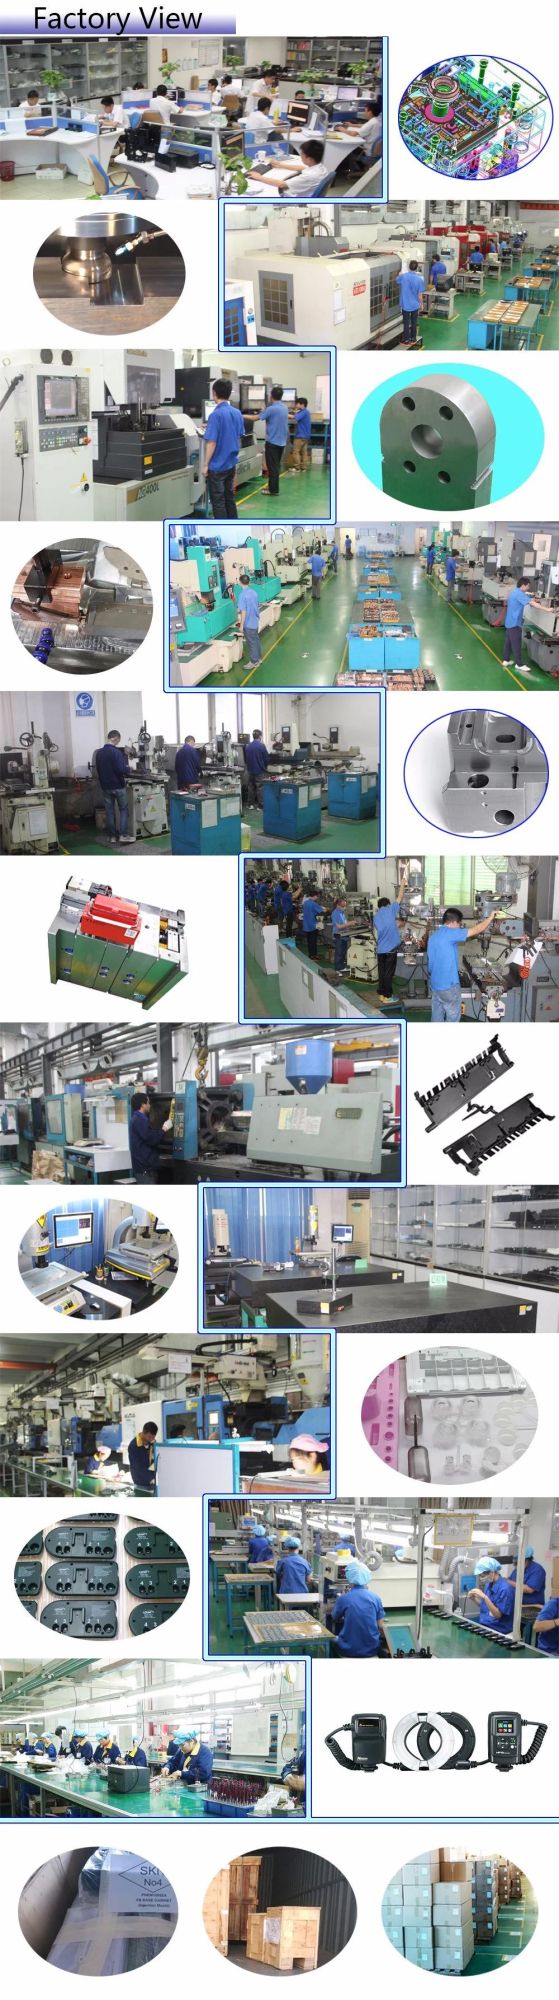 Camera Plastic Shell Mold, Plastic Injection Molding/Tooling